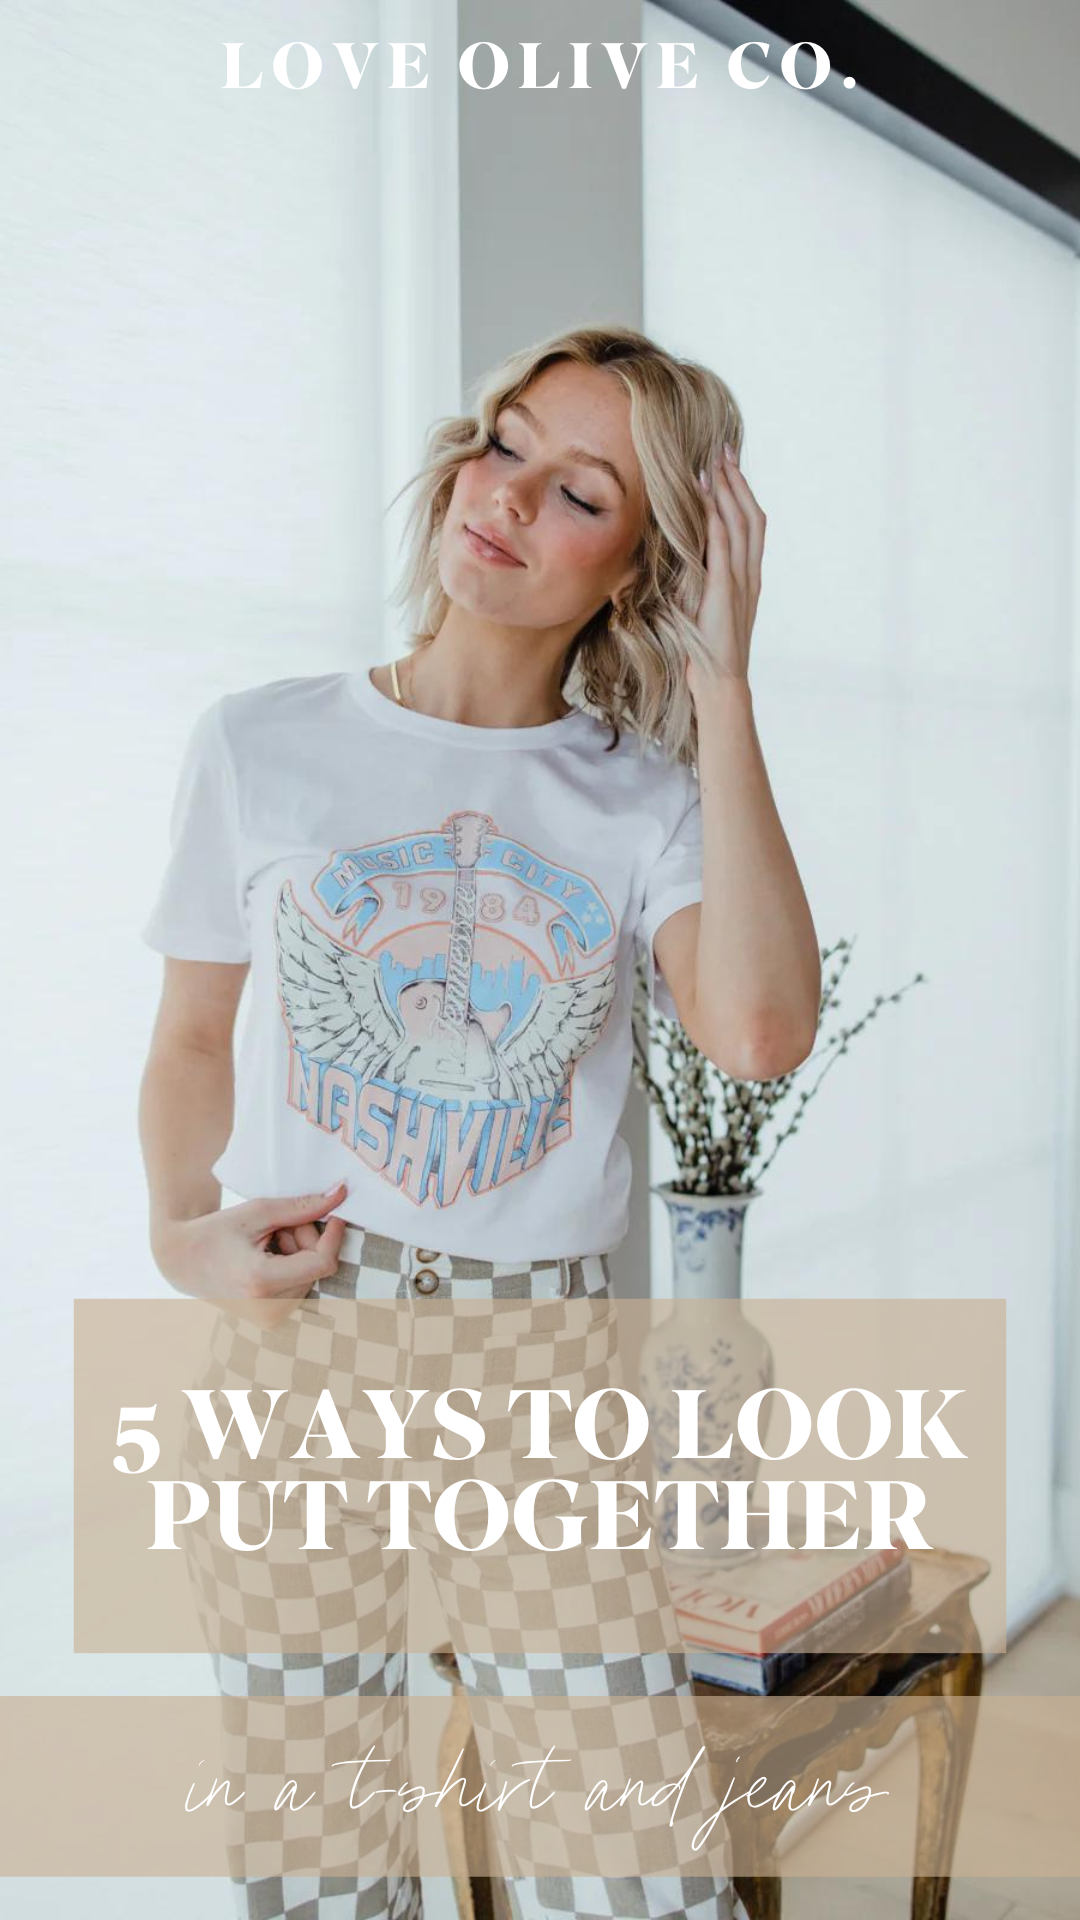 5 Ways to Look Put Together in a T-Shirt and Jeans – Love Olive Co